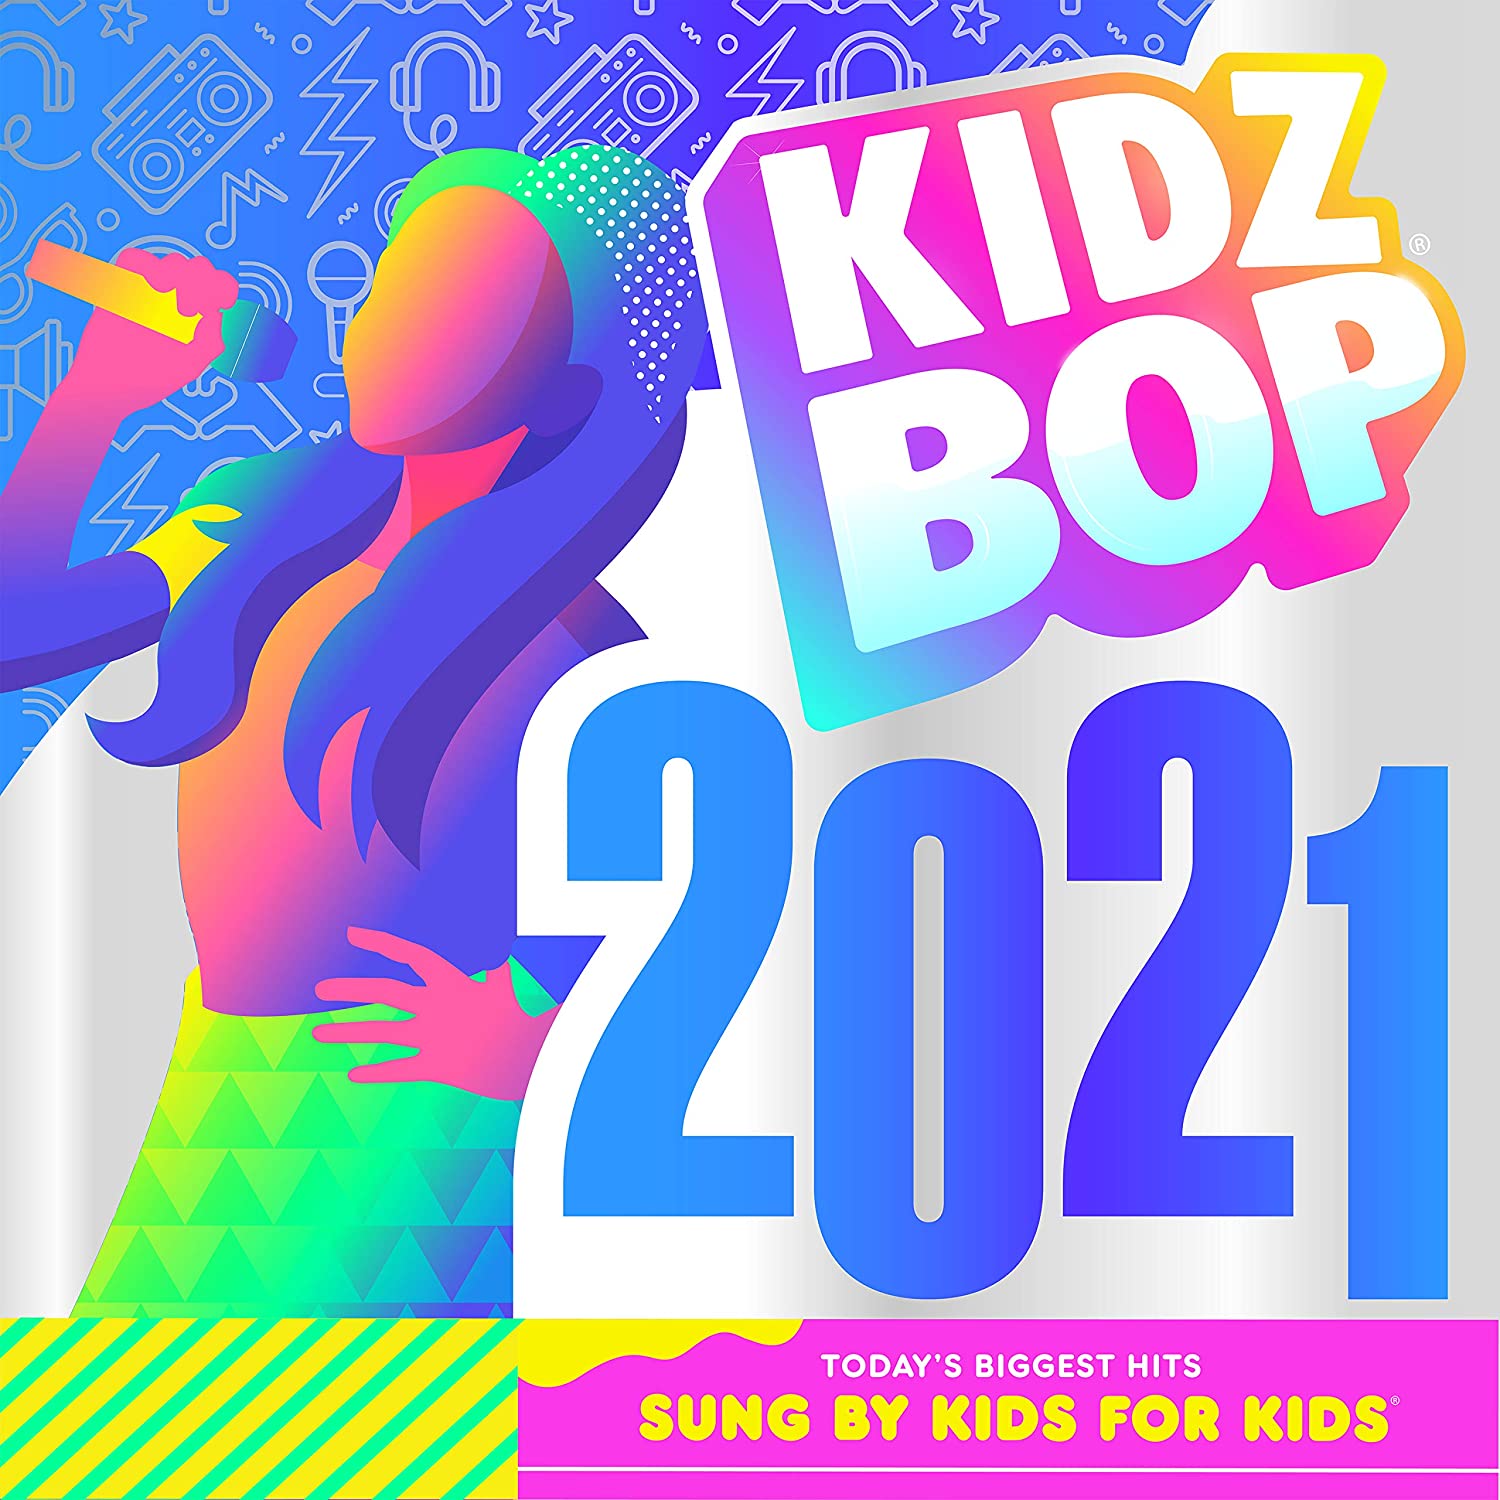 Featured image for “KIDZ BOP 2021”